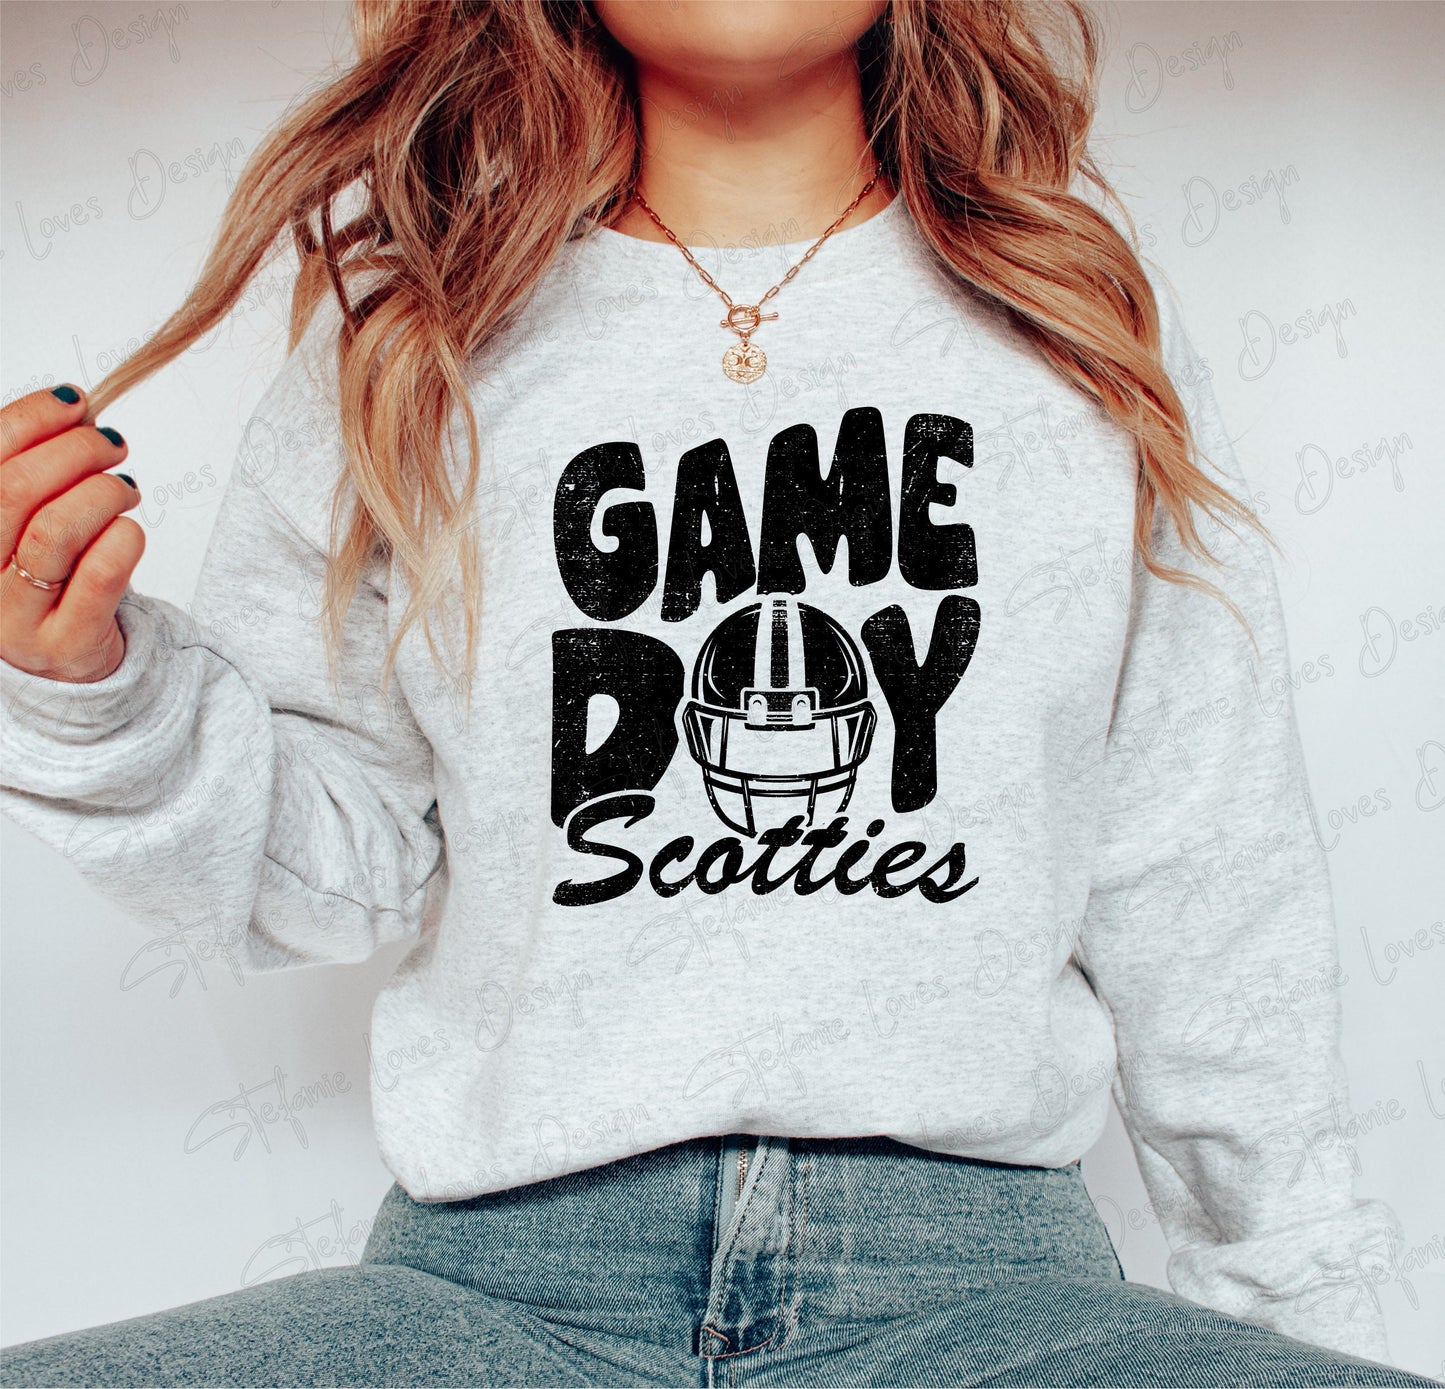 Game Day Scotties png, Distressed Game Day Helmet png, Game Day Football Helmet Scotties